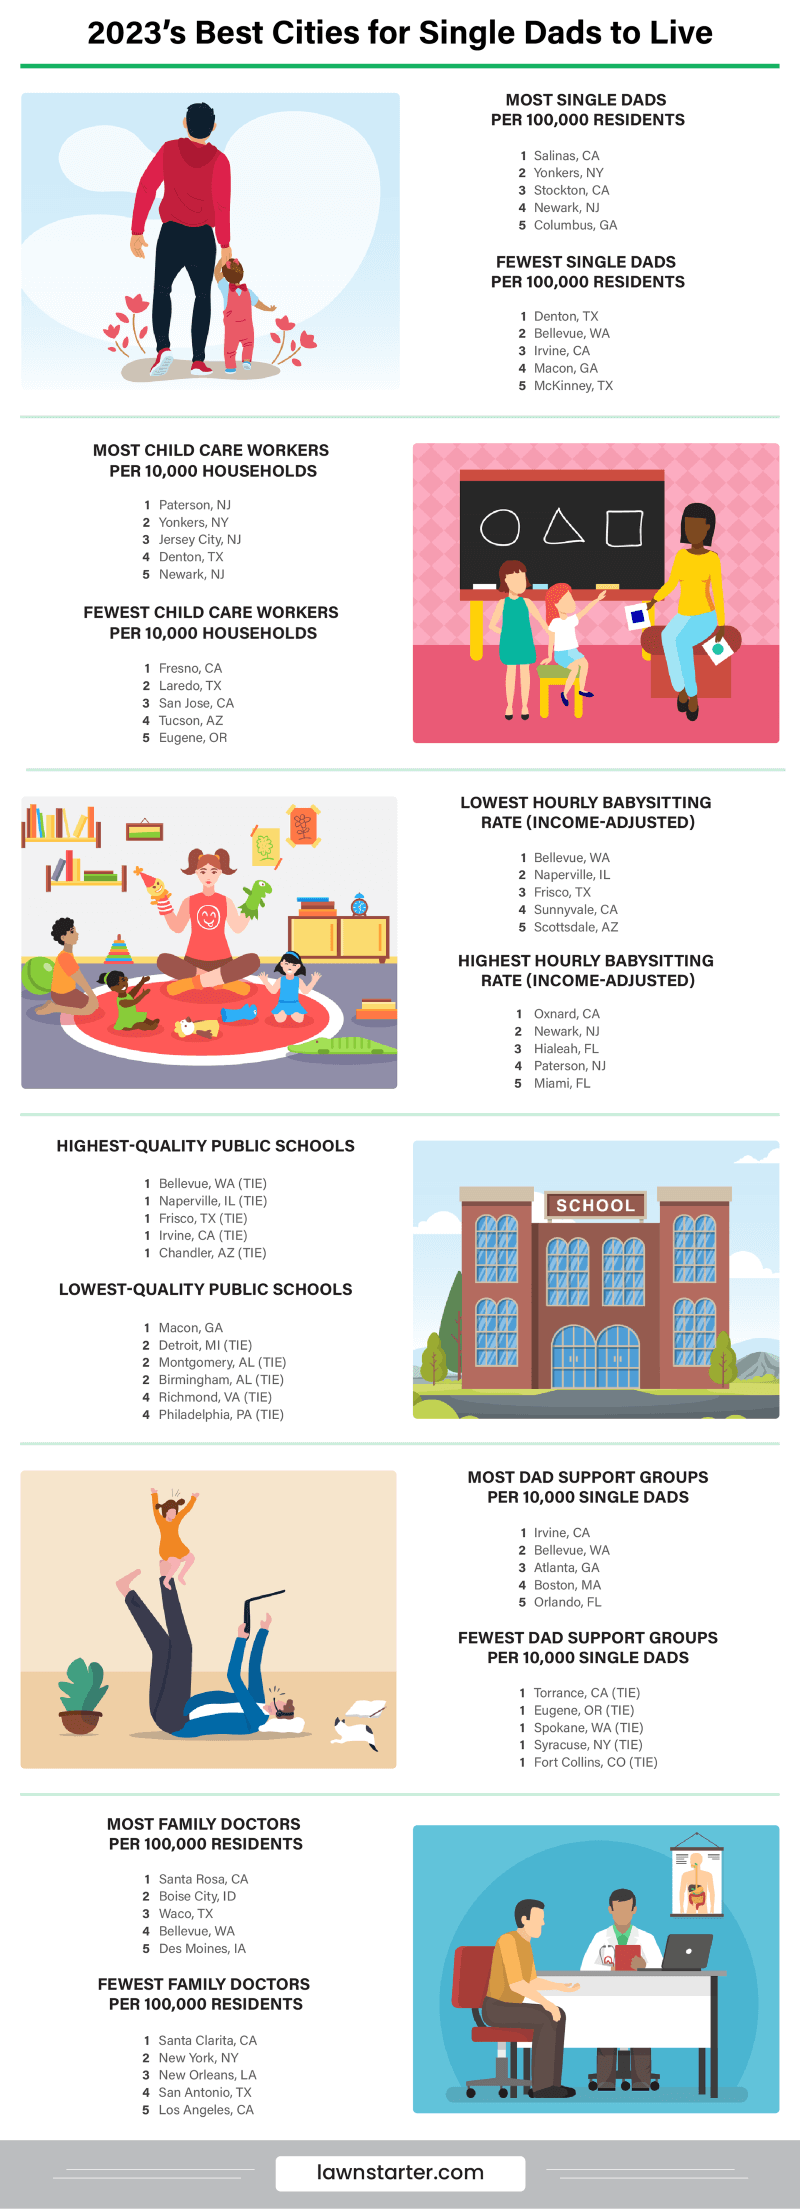 Infographic showing the Best Cities for Single Dads to Live, a ranking based on child care costs, public schools quality, fatherhood programs, and more